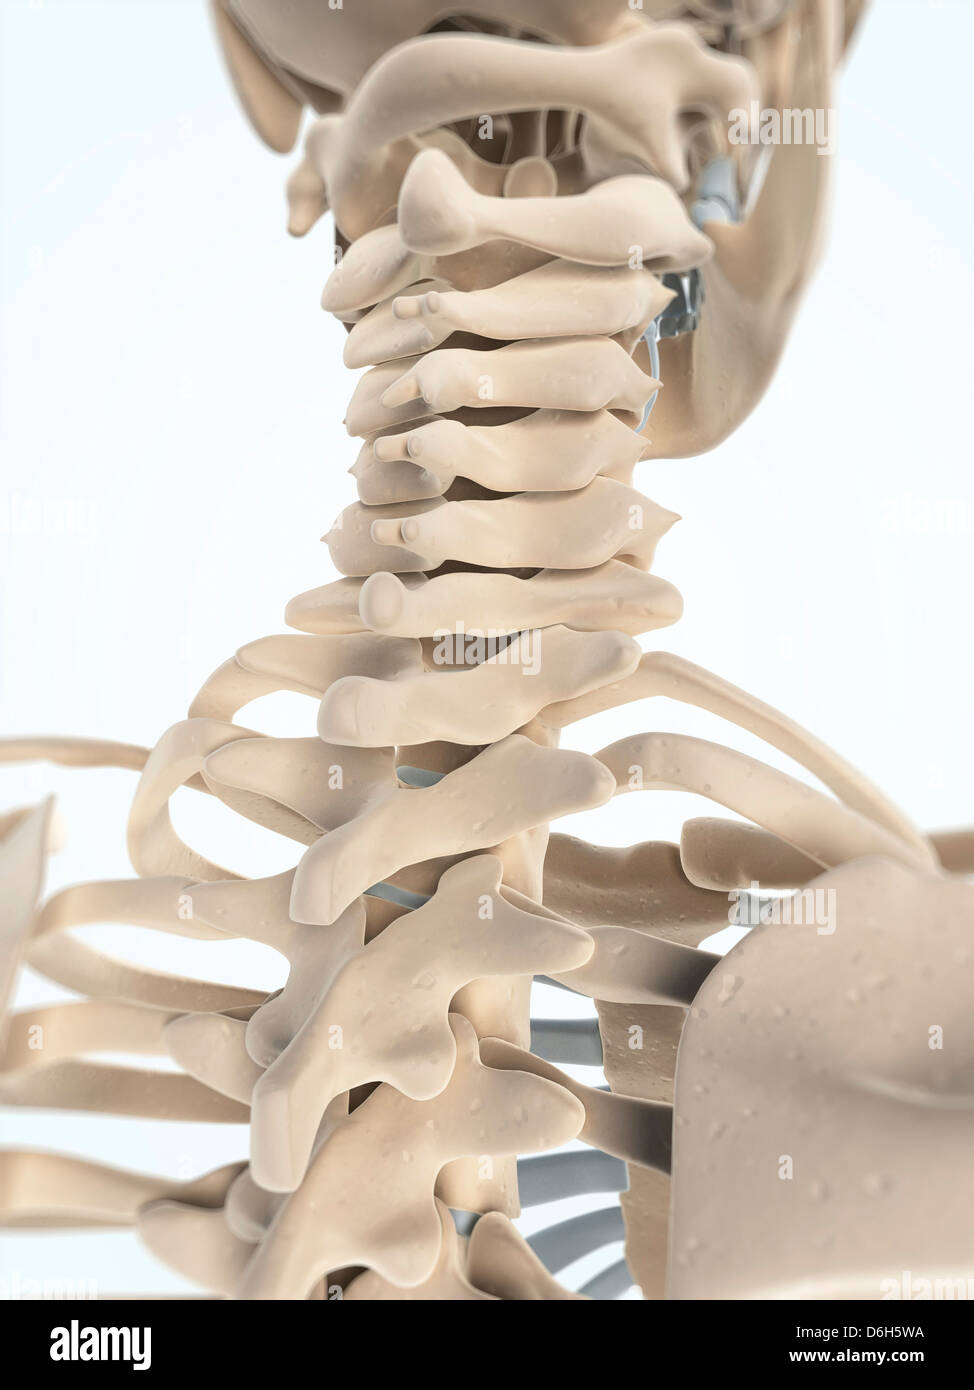 Normal Neck Bones High Resolution Stock Photography and Images - Alamy